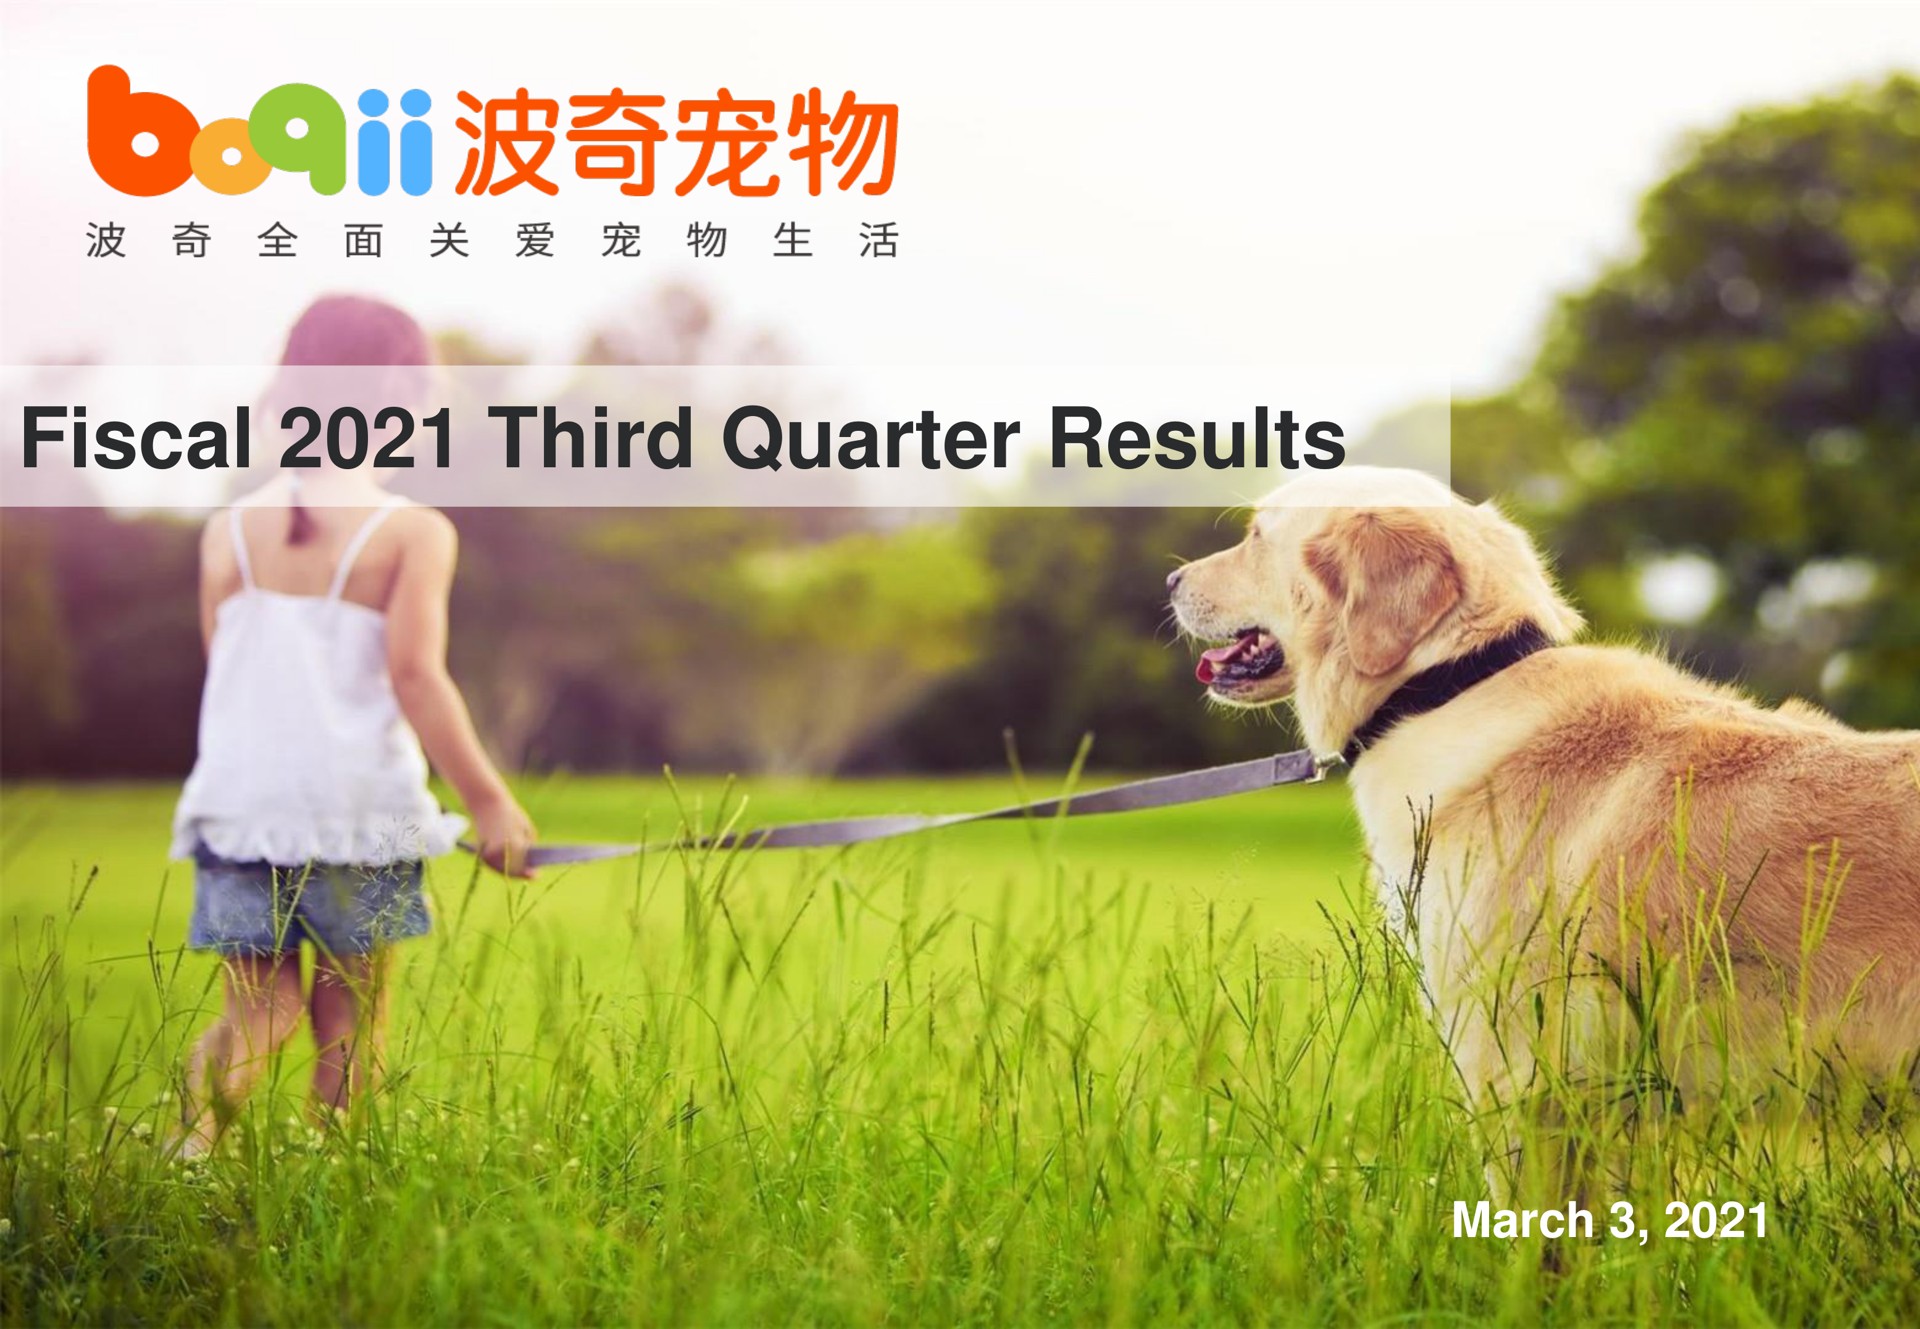 fiscal third quarter results march | Boqii Holding